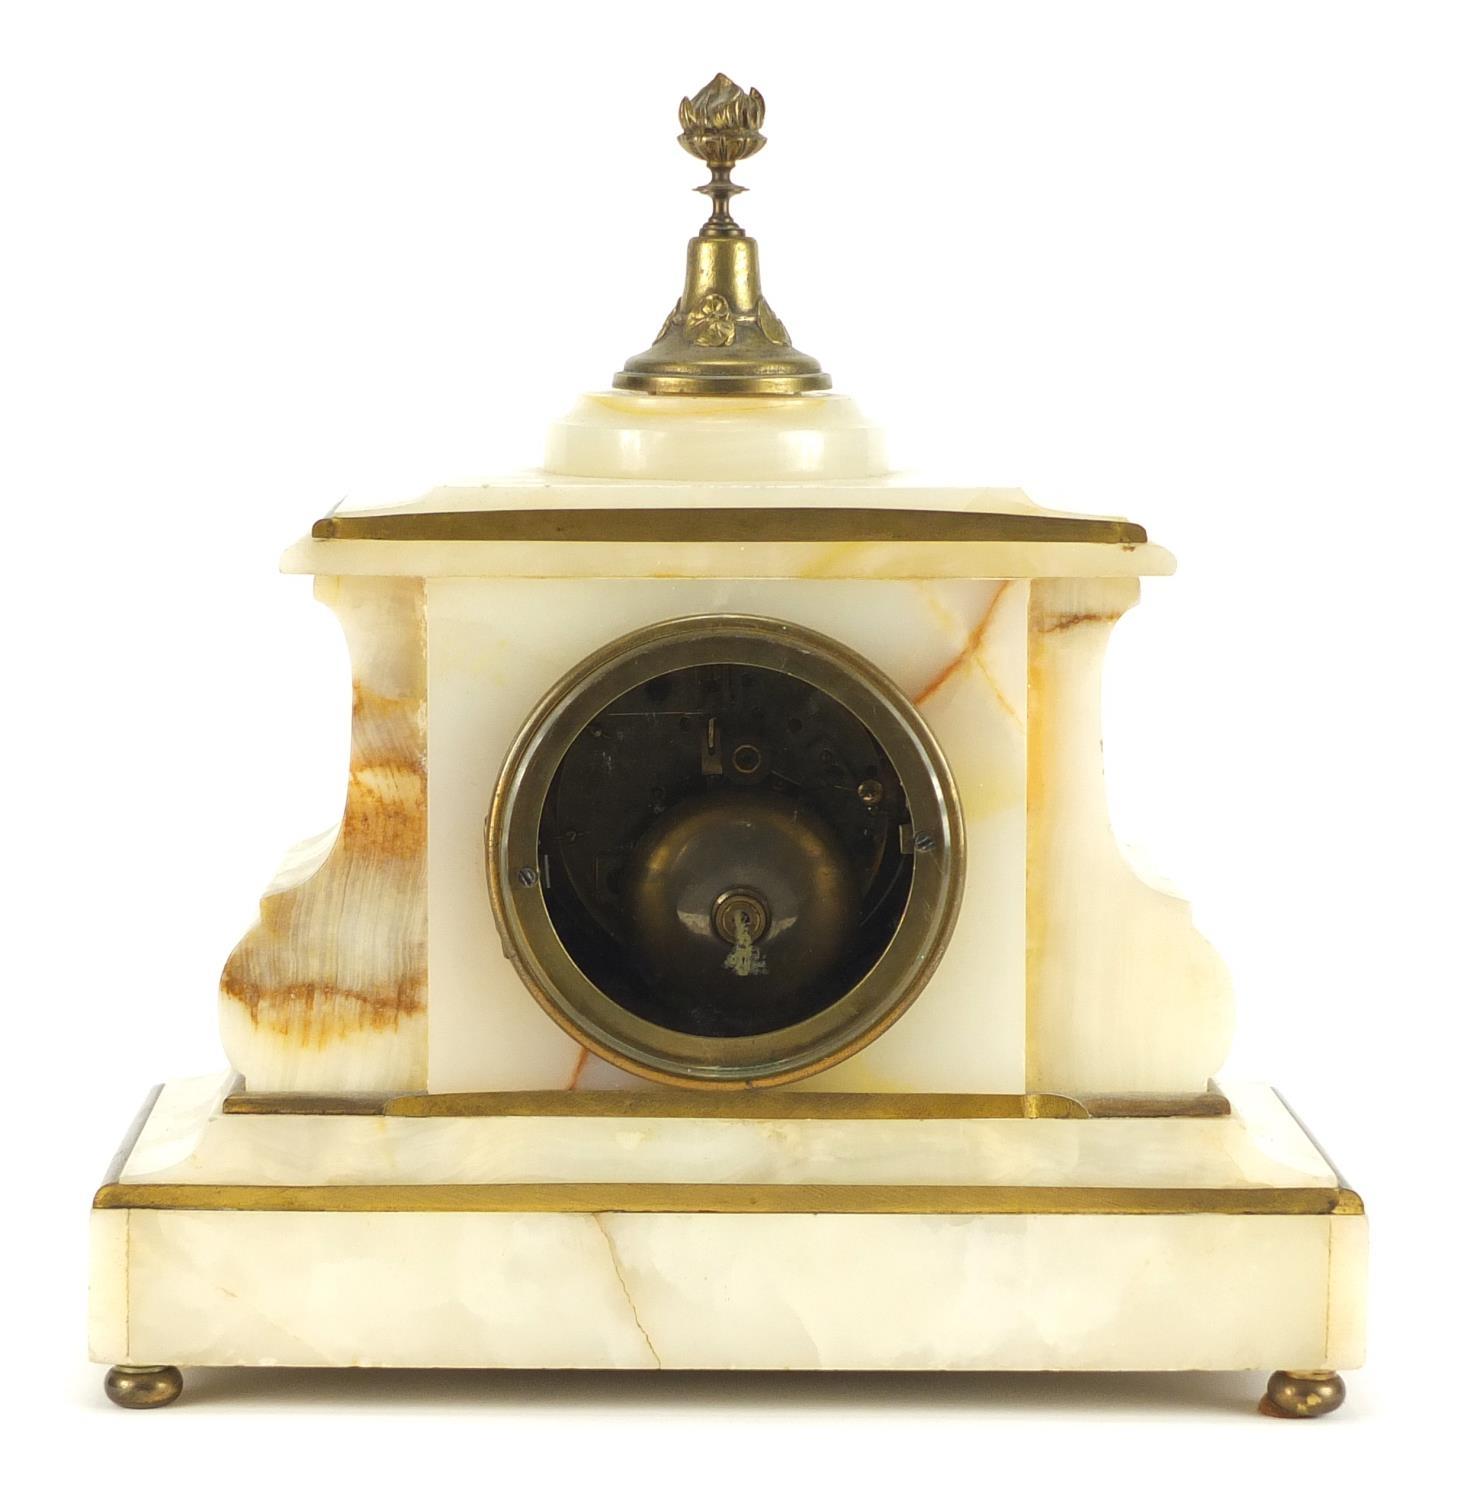 French Bordier onyx striking mantel clock with brass mounts, the dial with Roman numerals marked - Image 5 of 7